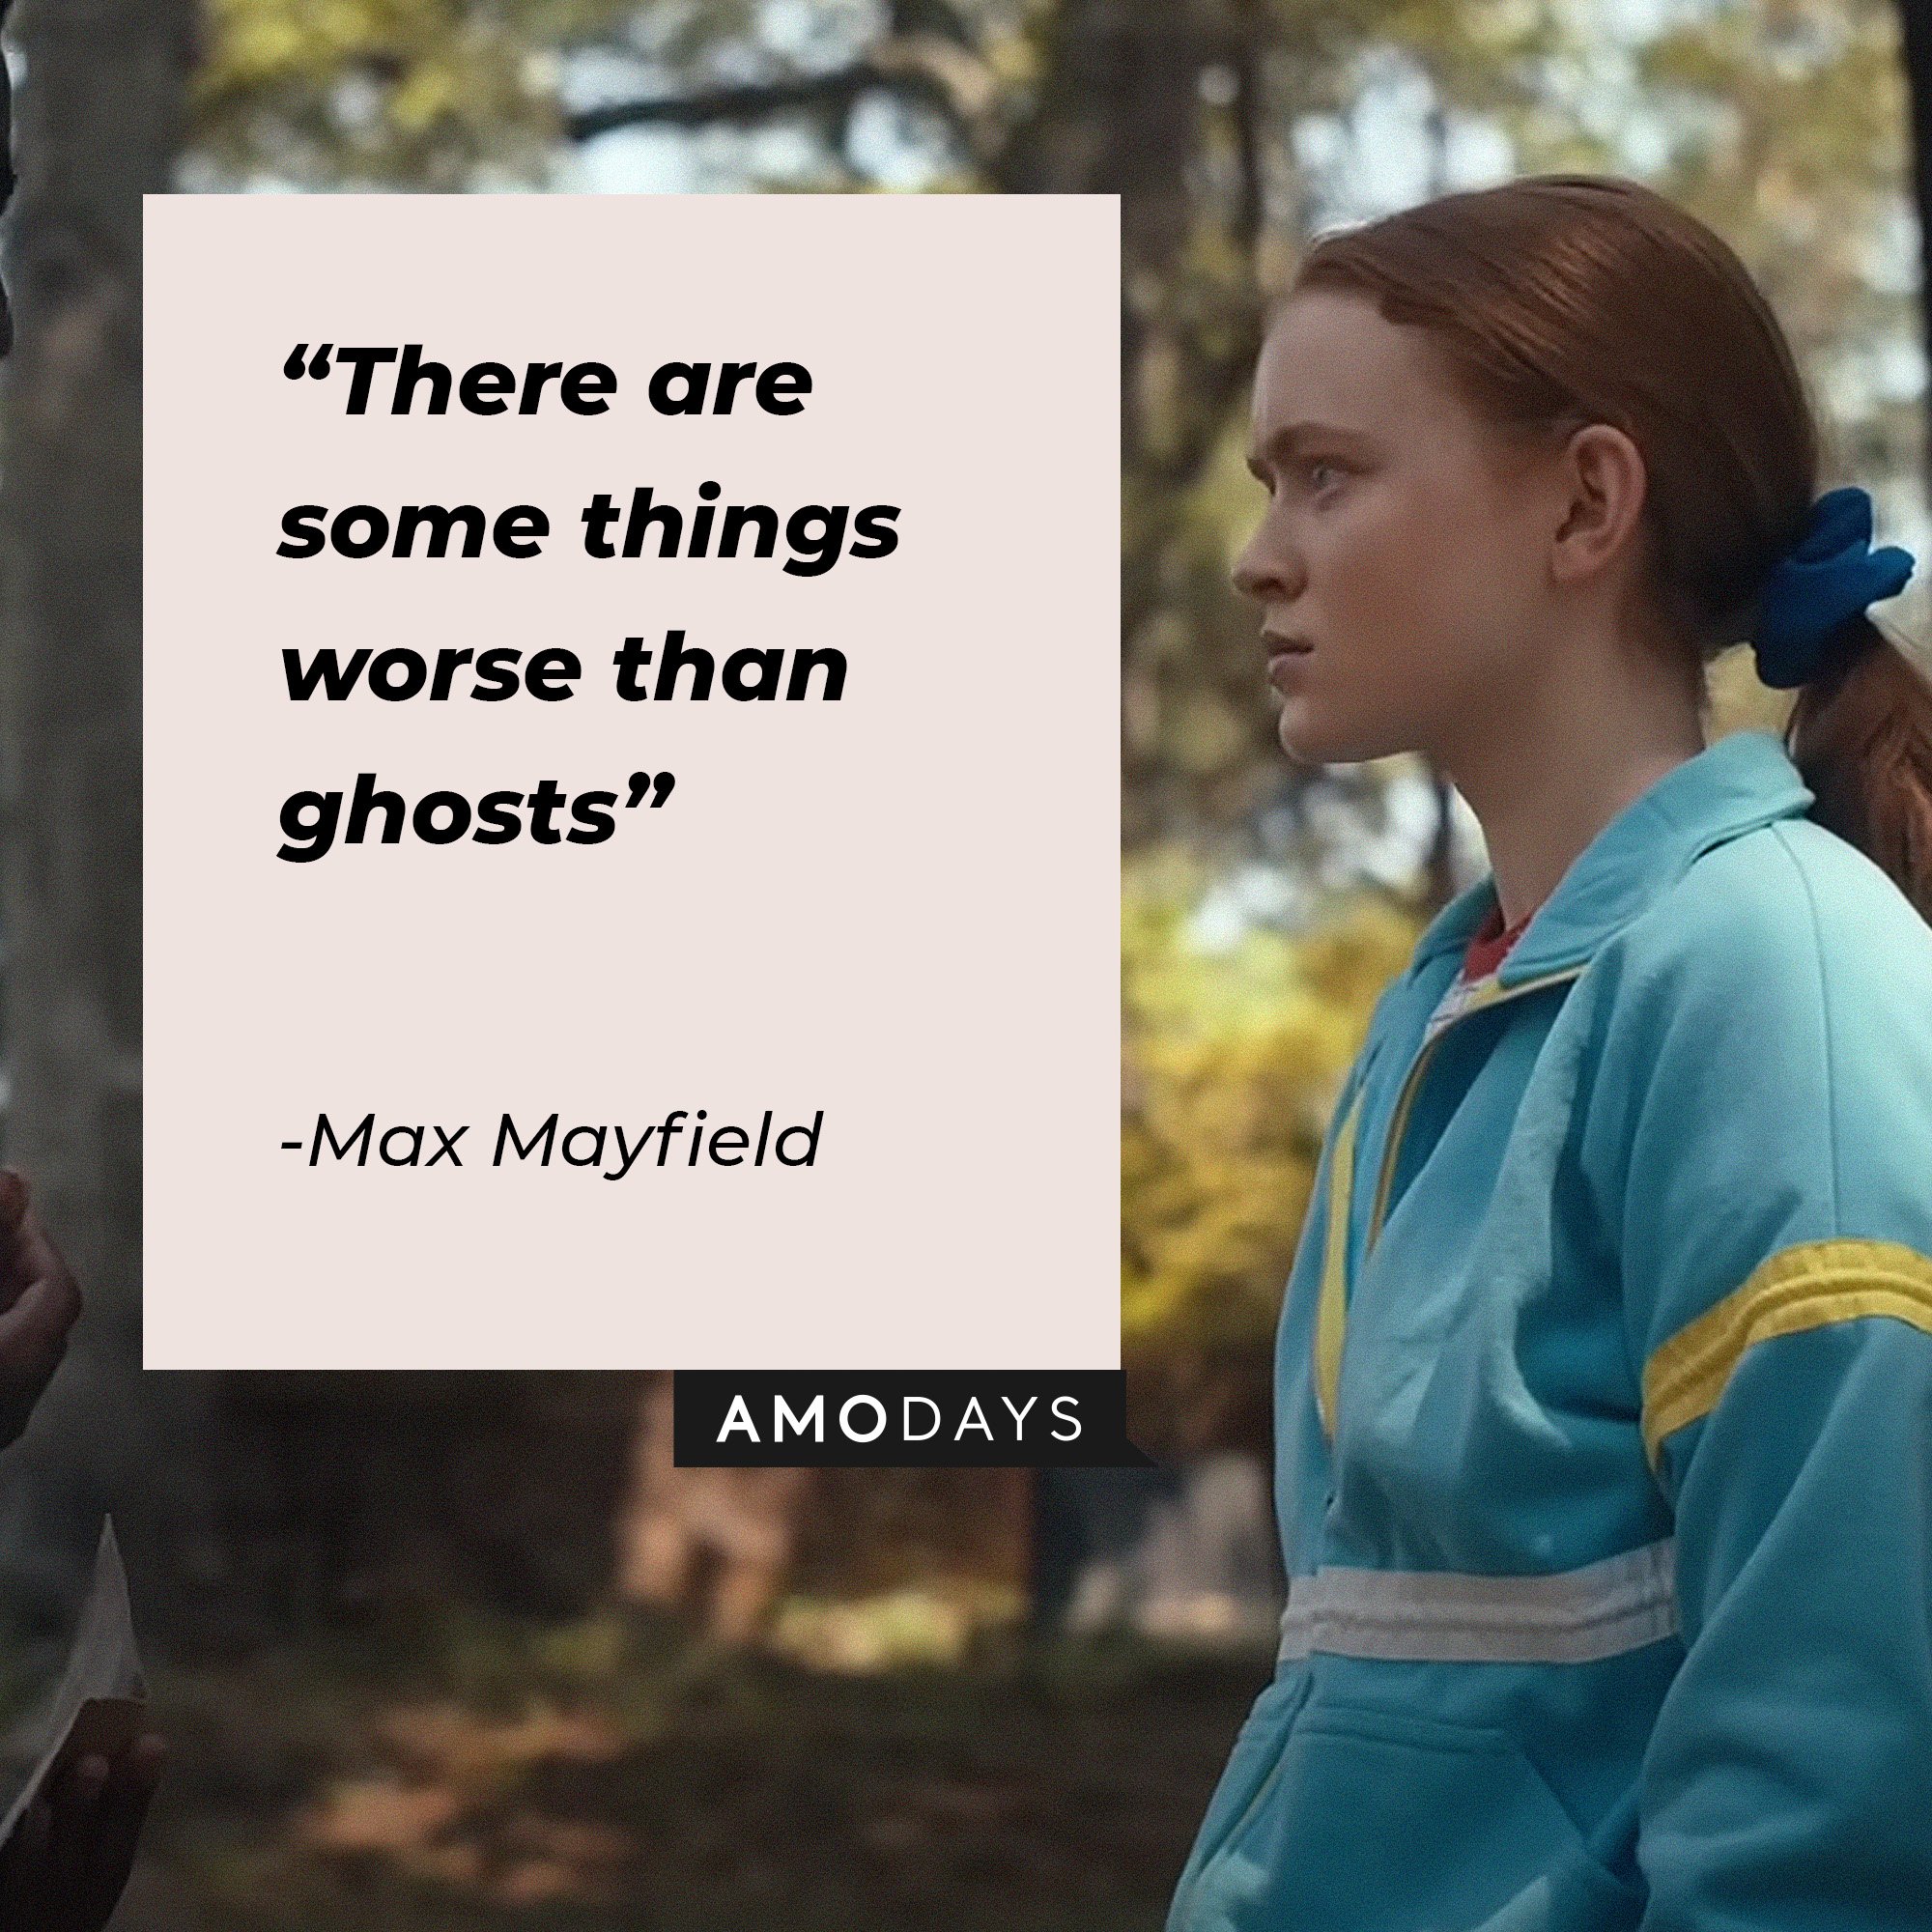 Max Mayfield’s quote: "There are some things worse than ghosts." | Image: AmoDays 